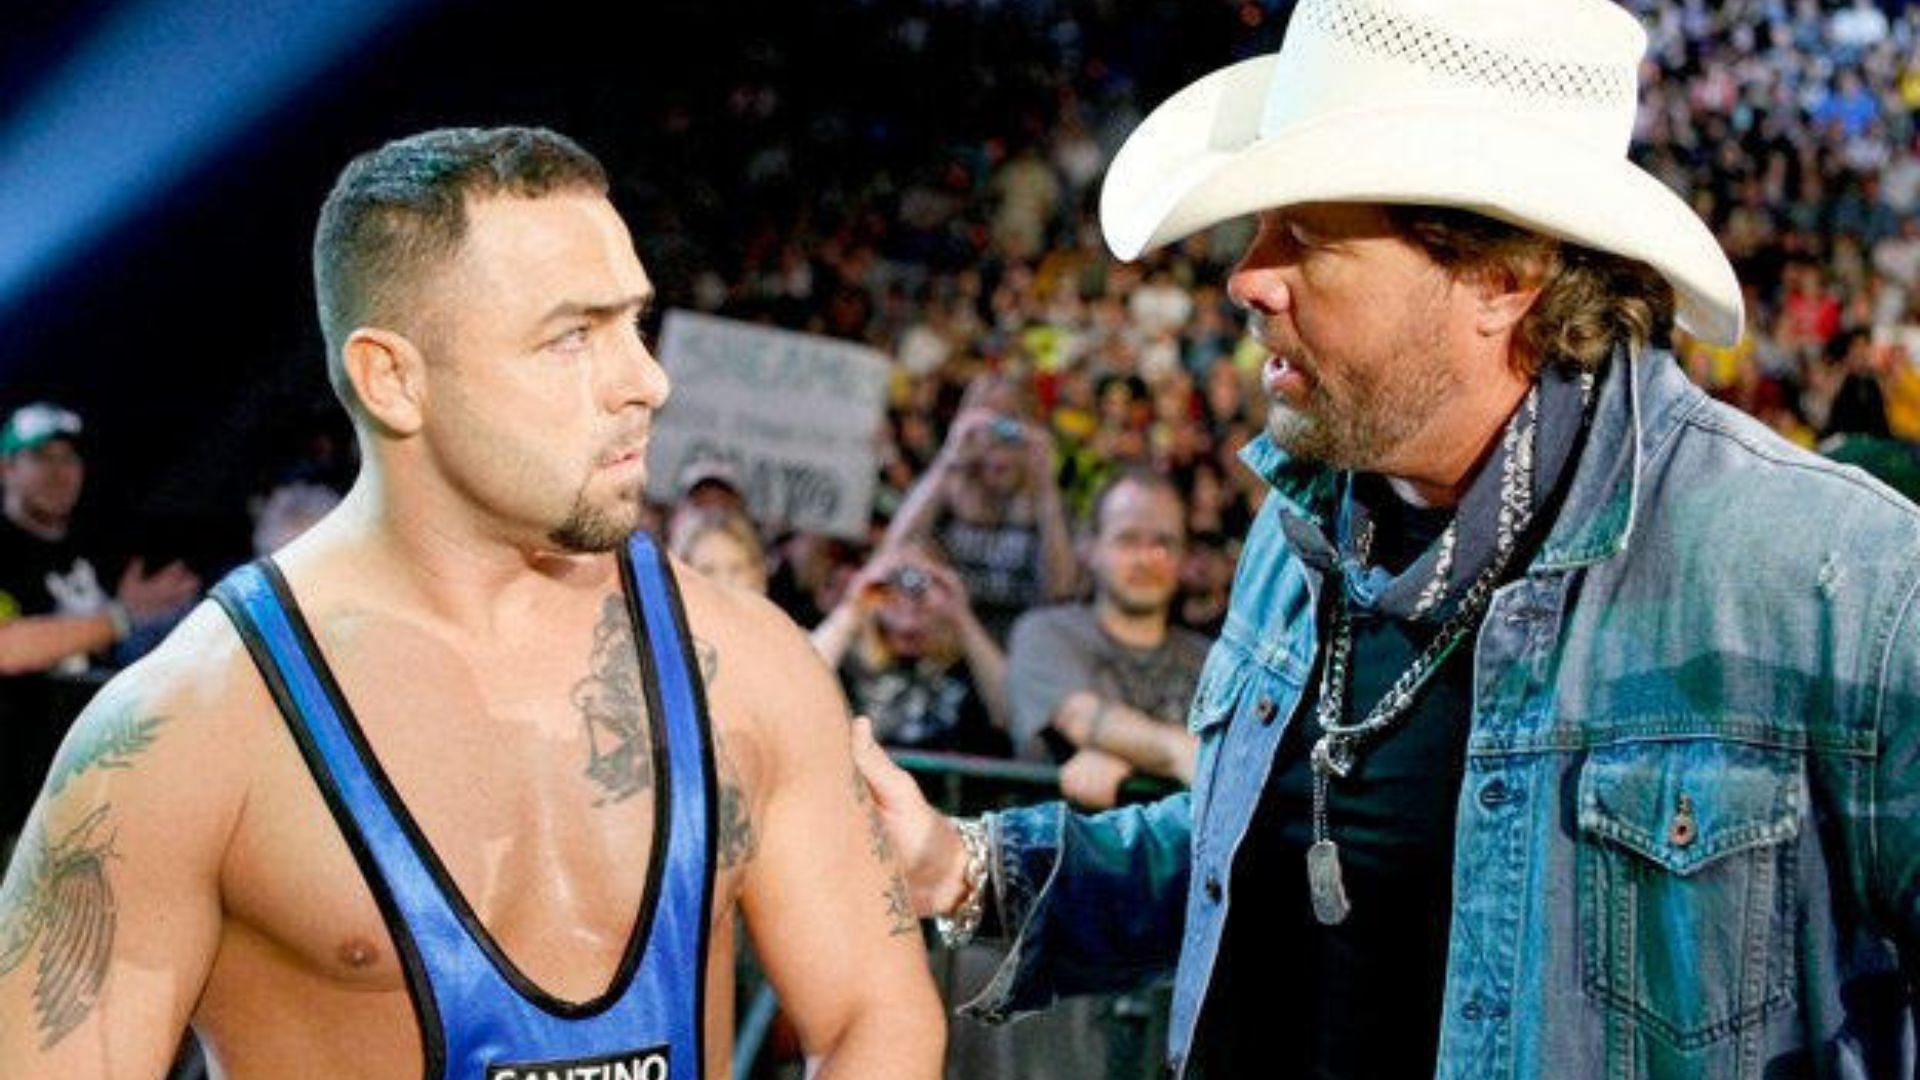 More of Toby Keith&#039;s WWE RAW appearance in 2010